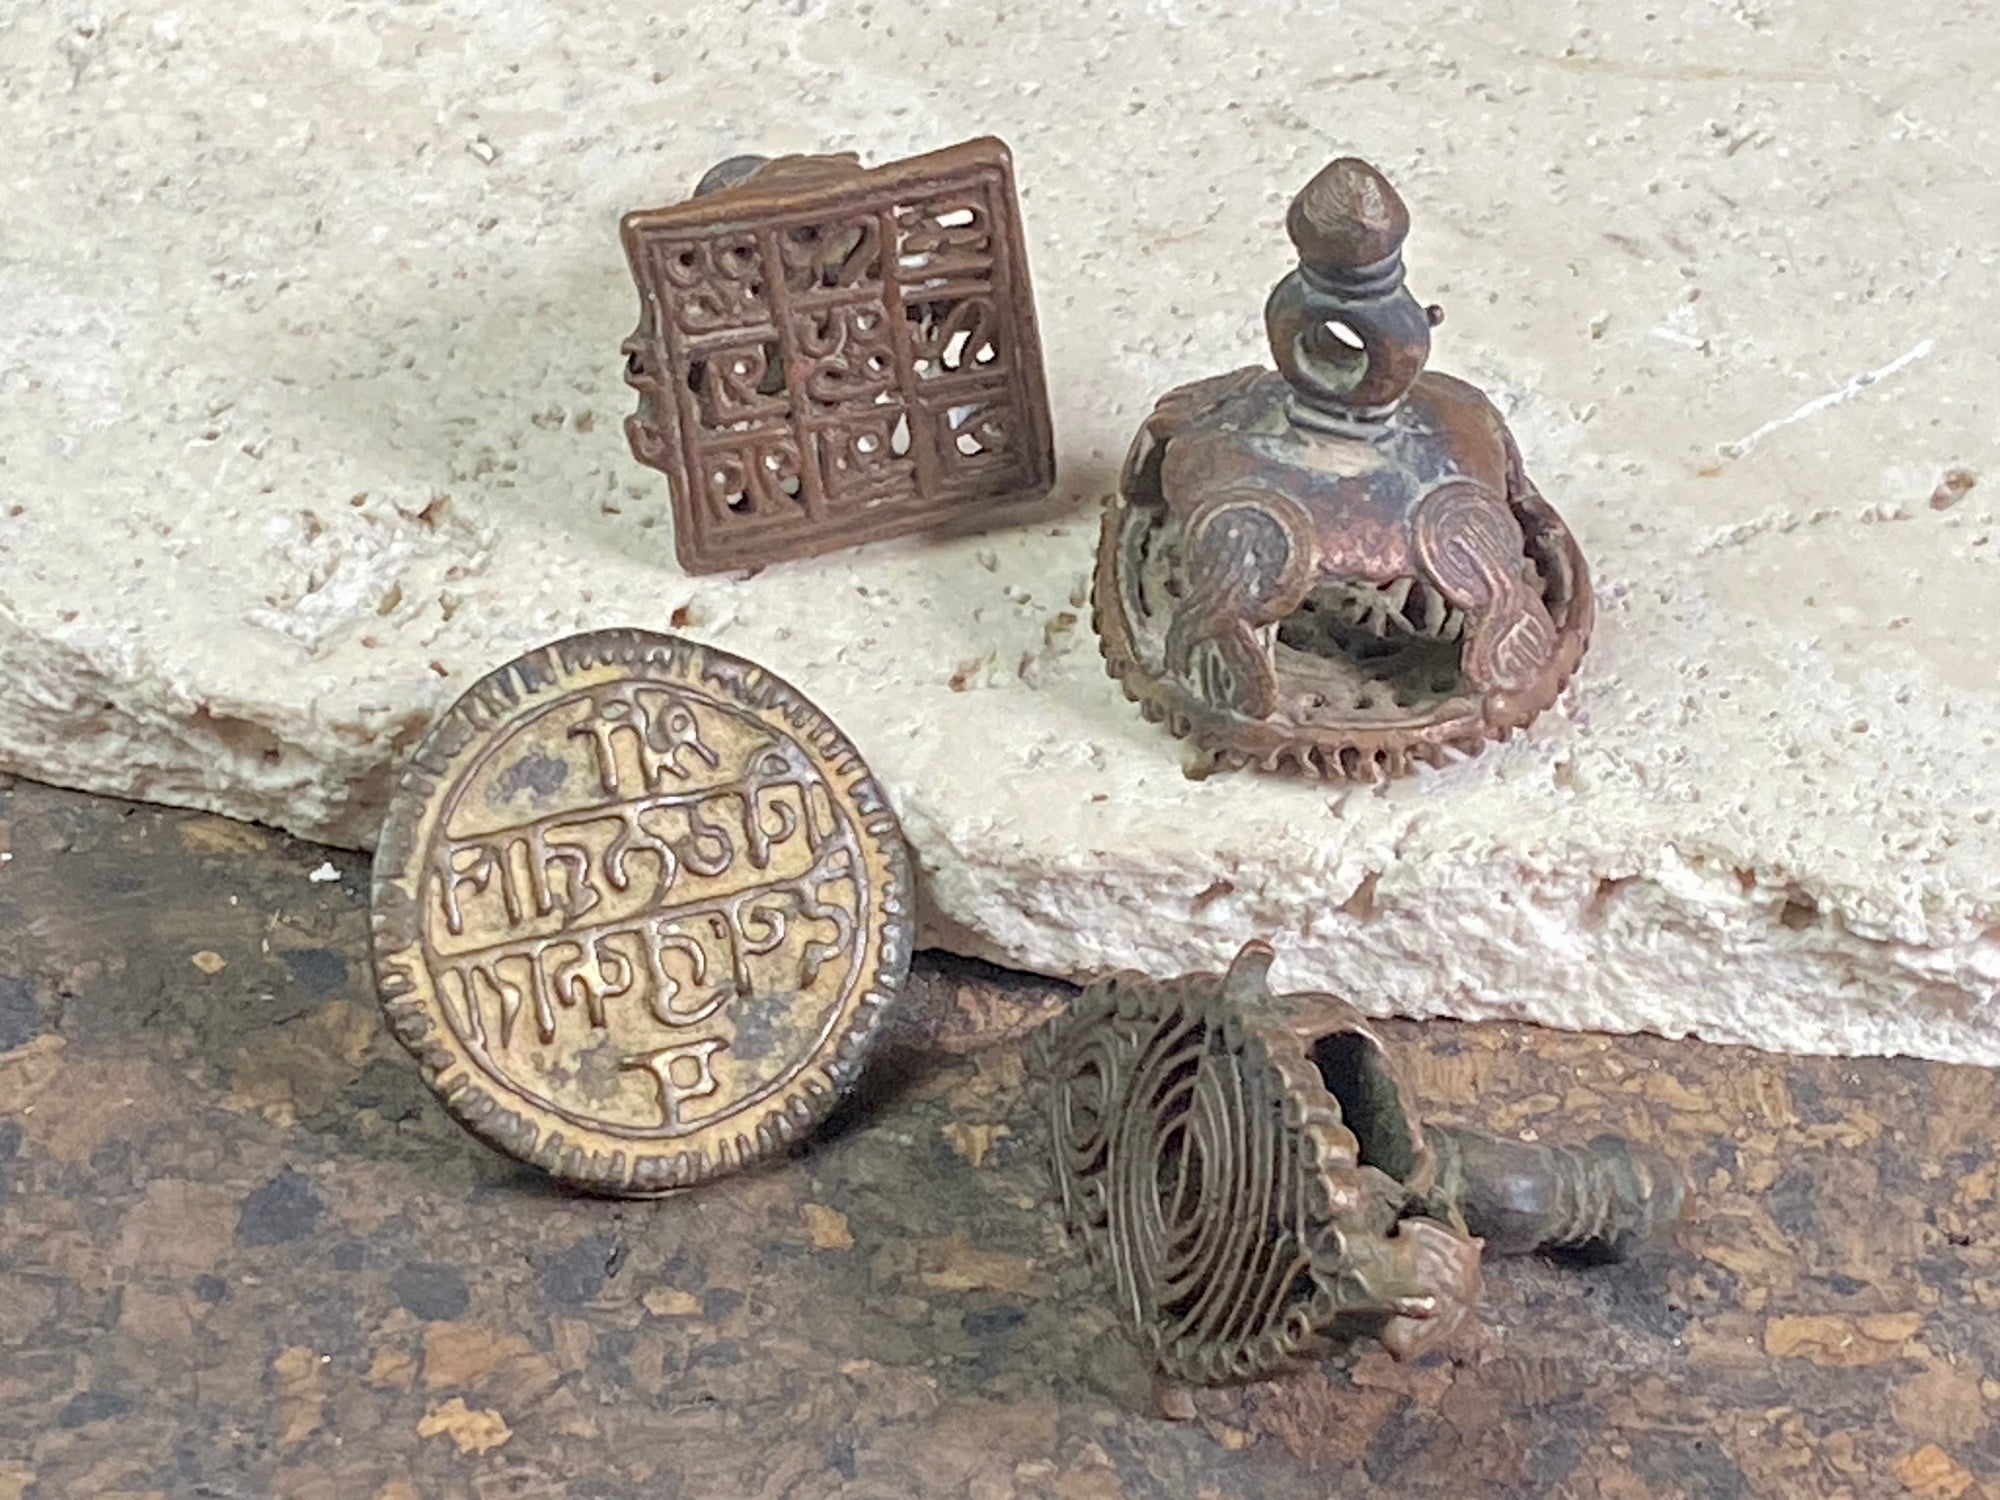 Made from a copper bronze alloy, these east Indian temple stamps are made via the lost wax method of casting and are called Chhapa stamps. They originate in Orissa and Bengali temples, India - ca. 1900.